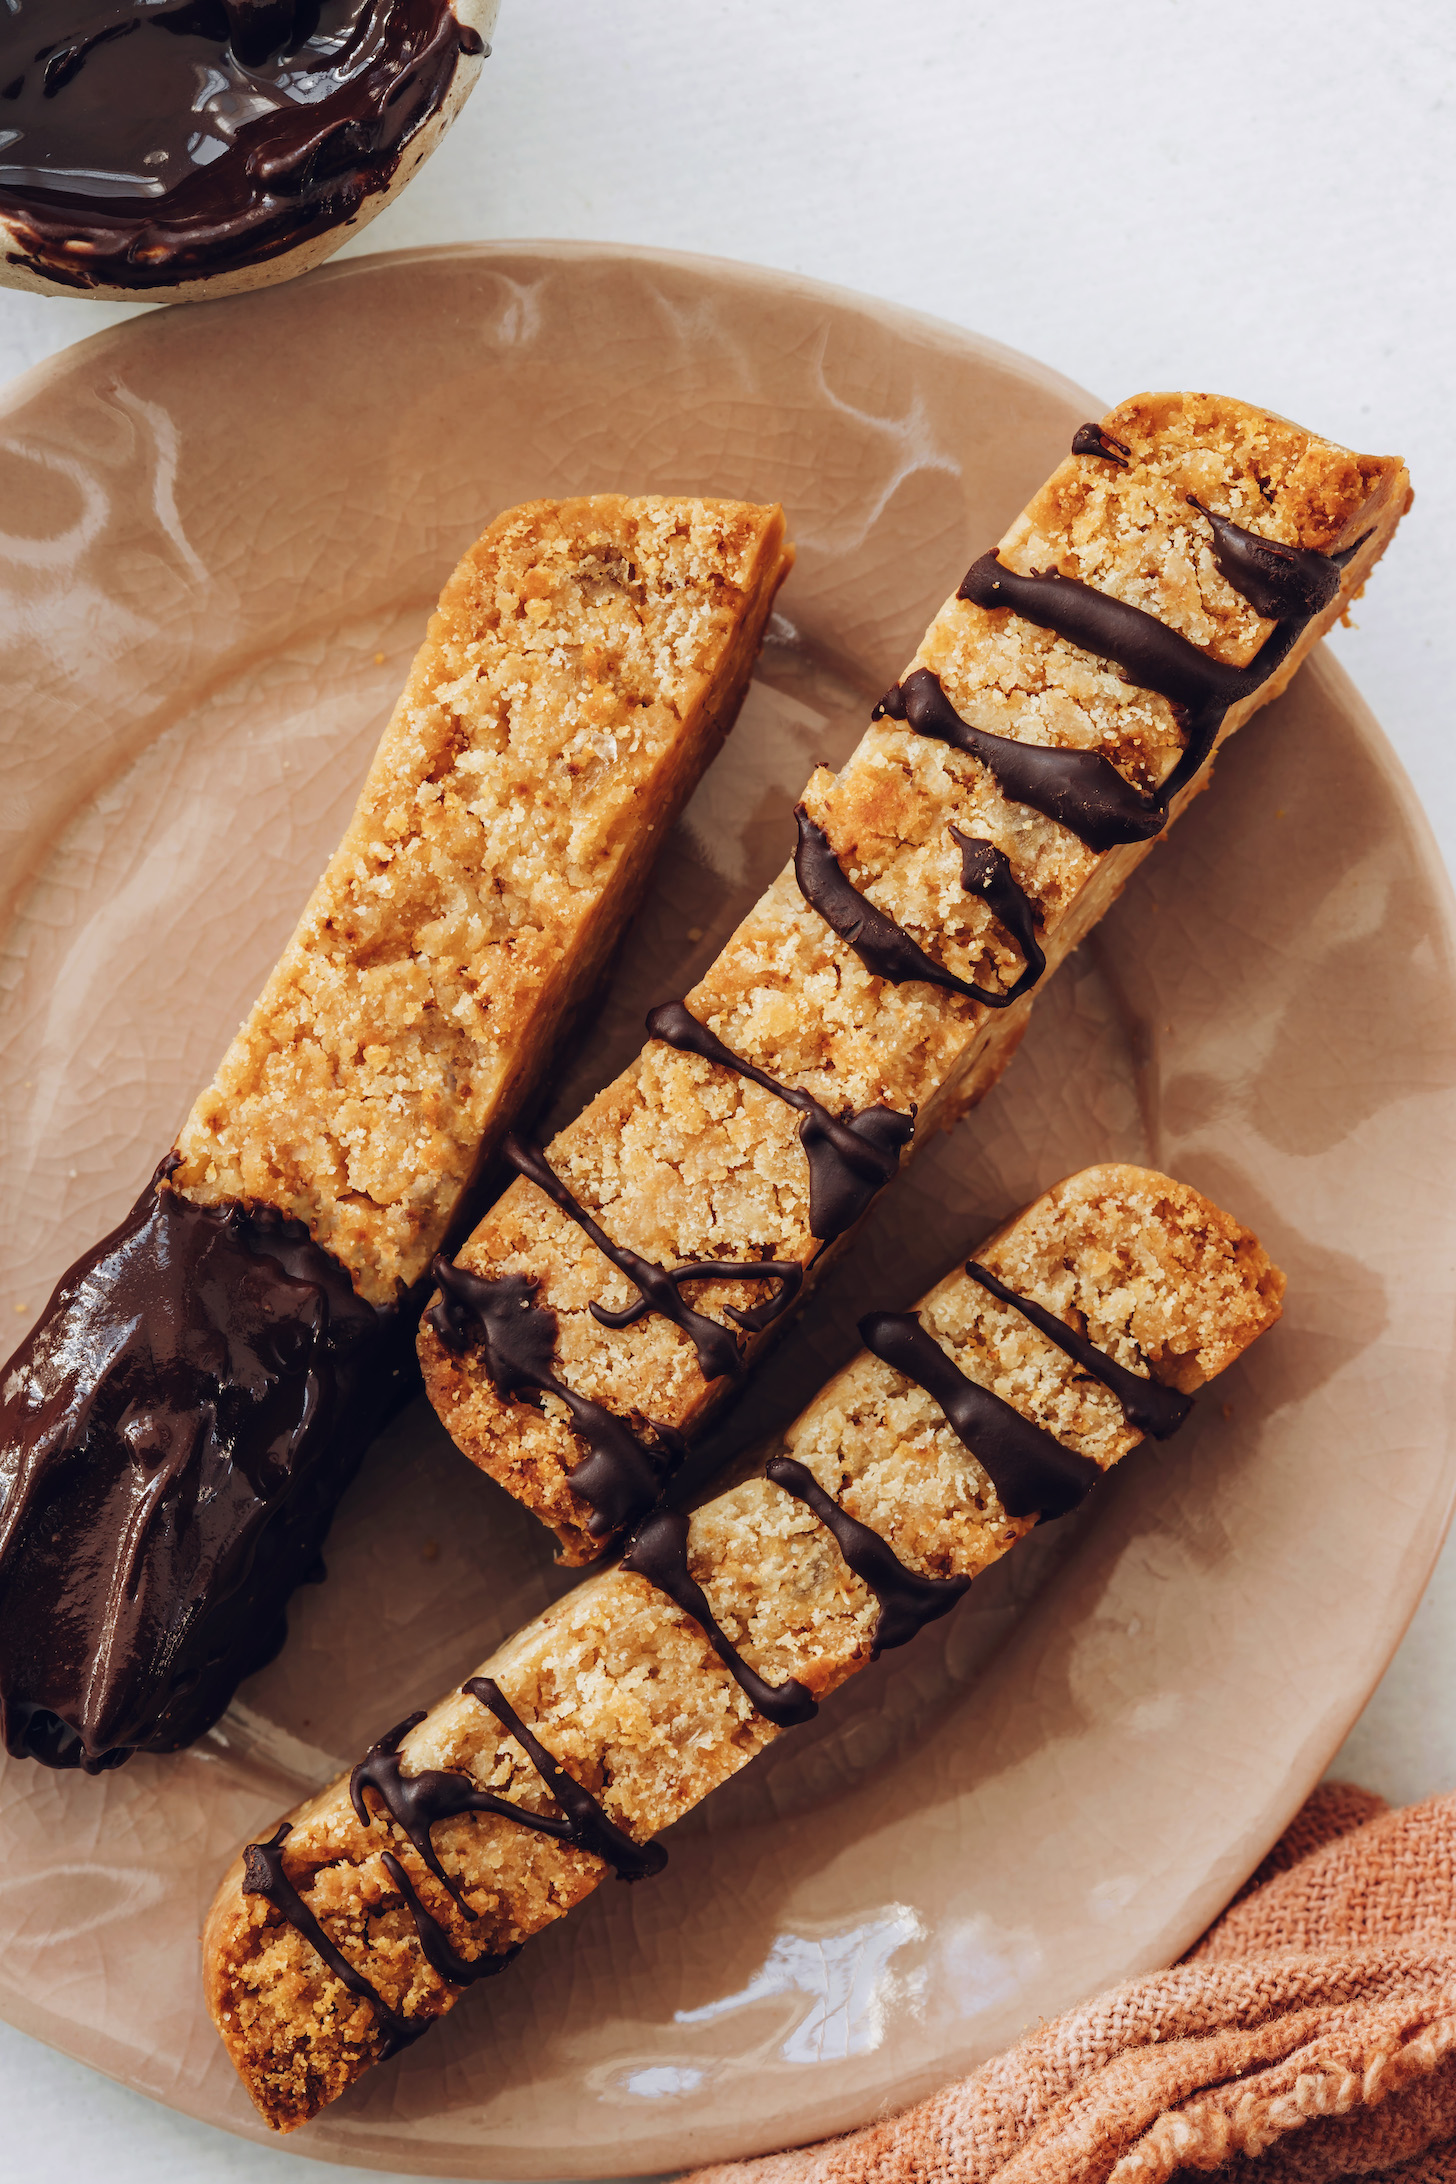 Plate of gluten-free ginger biscotti with a chocolate drizzle on dip